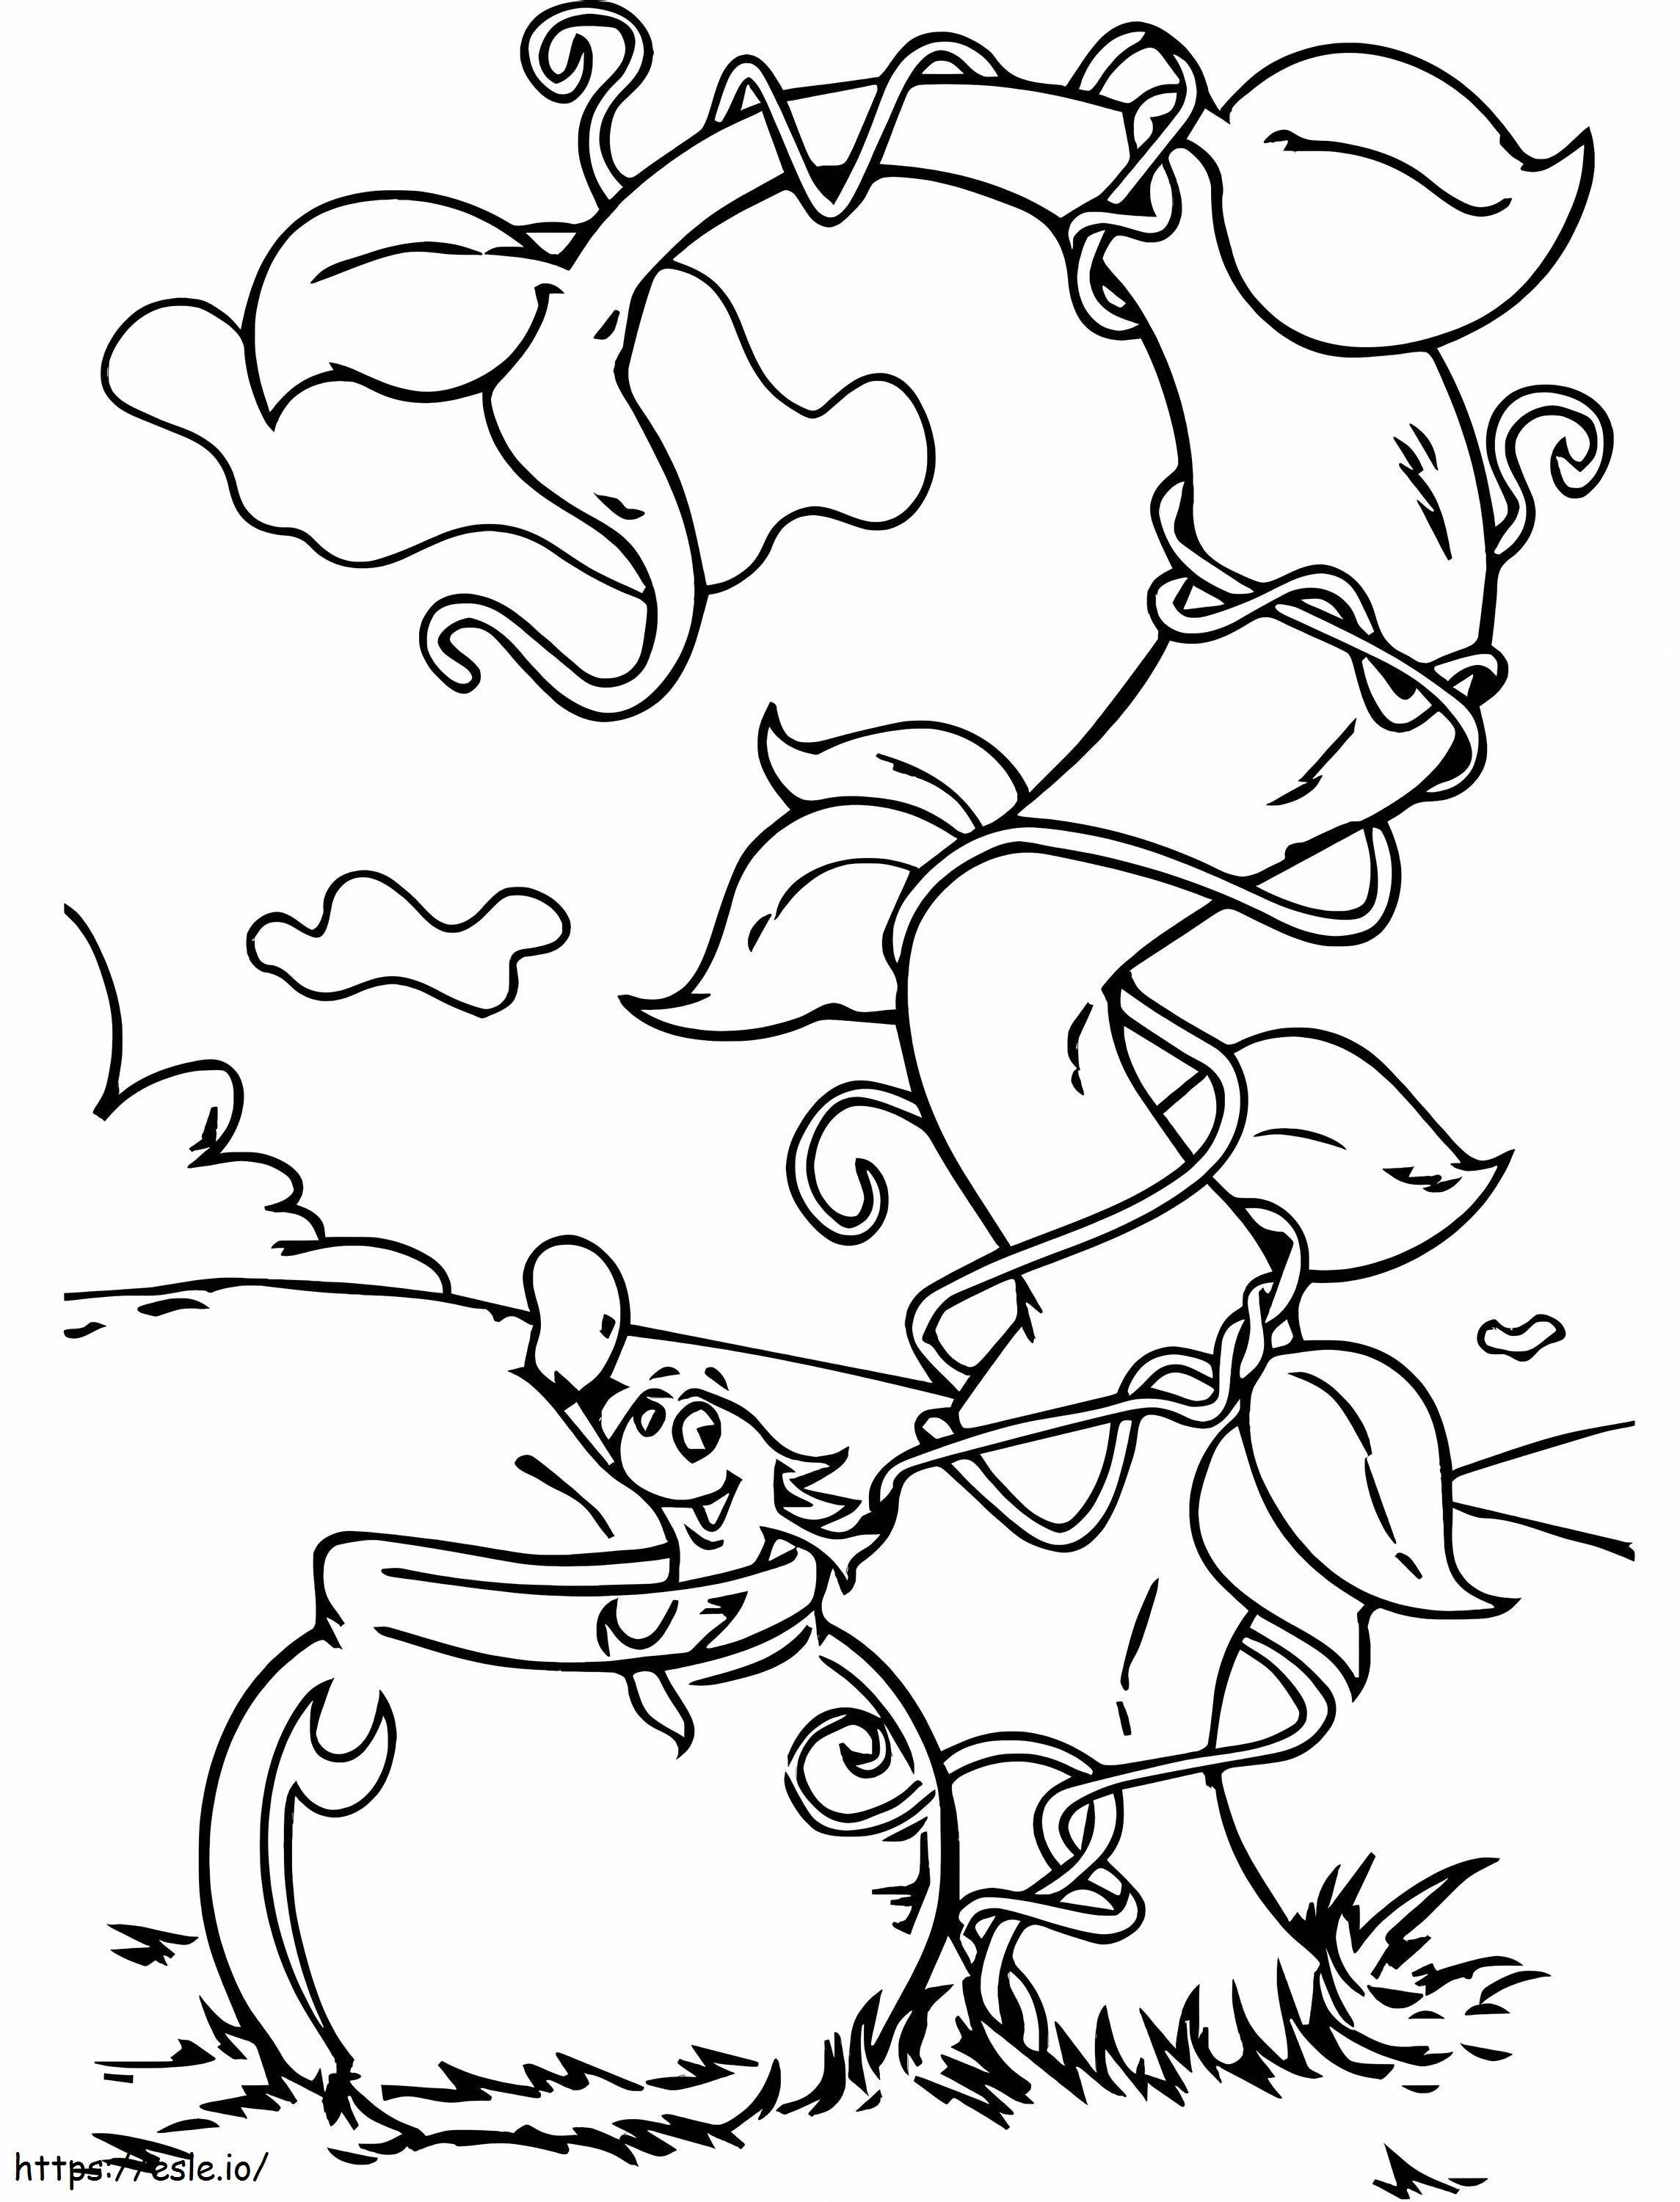 The Fish A4 coloring page